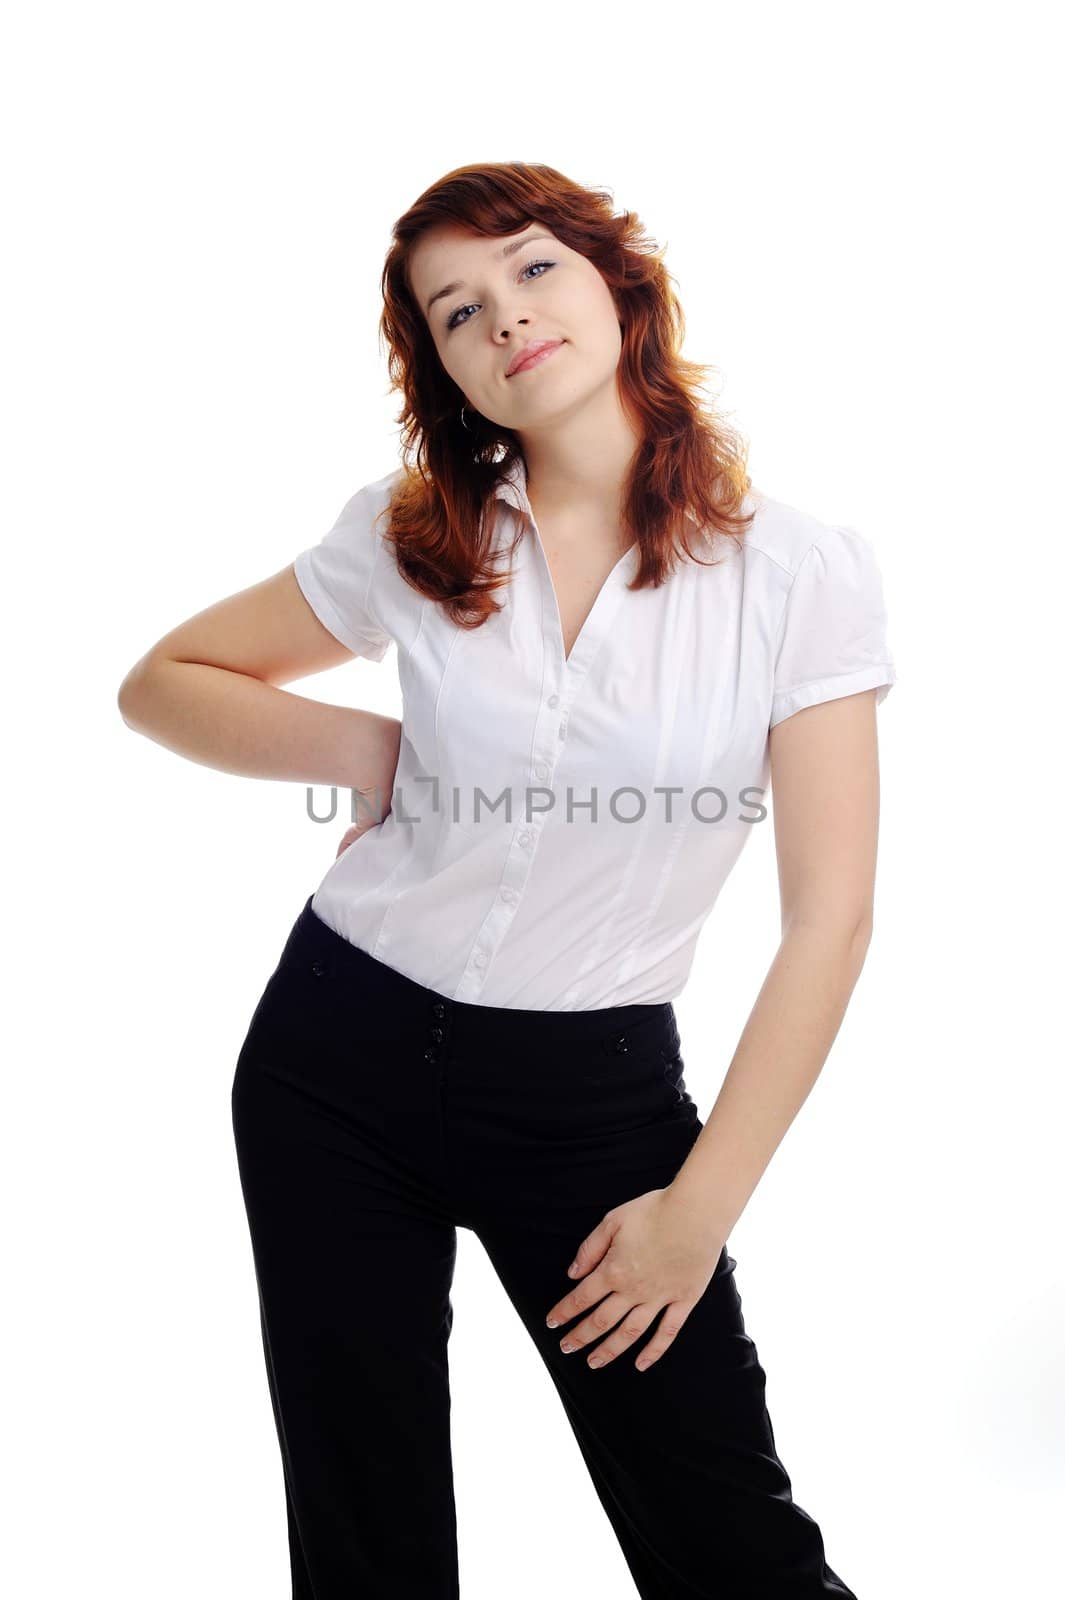 An image of cheerful young woman in white blouse